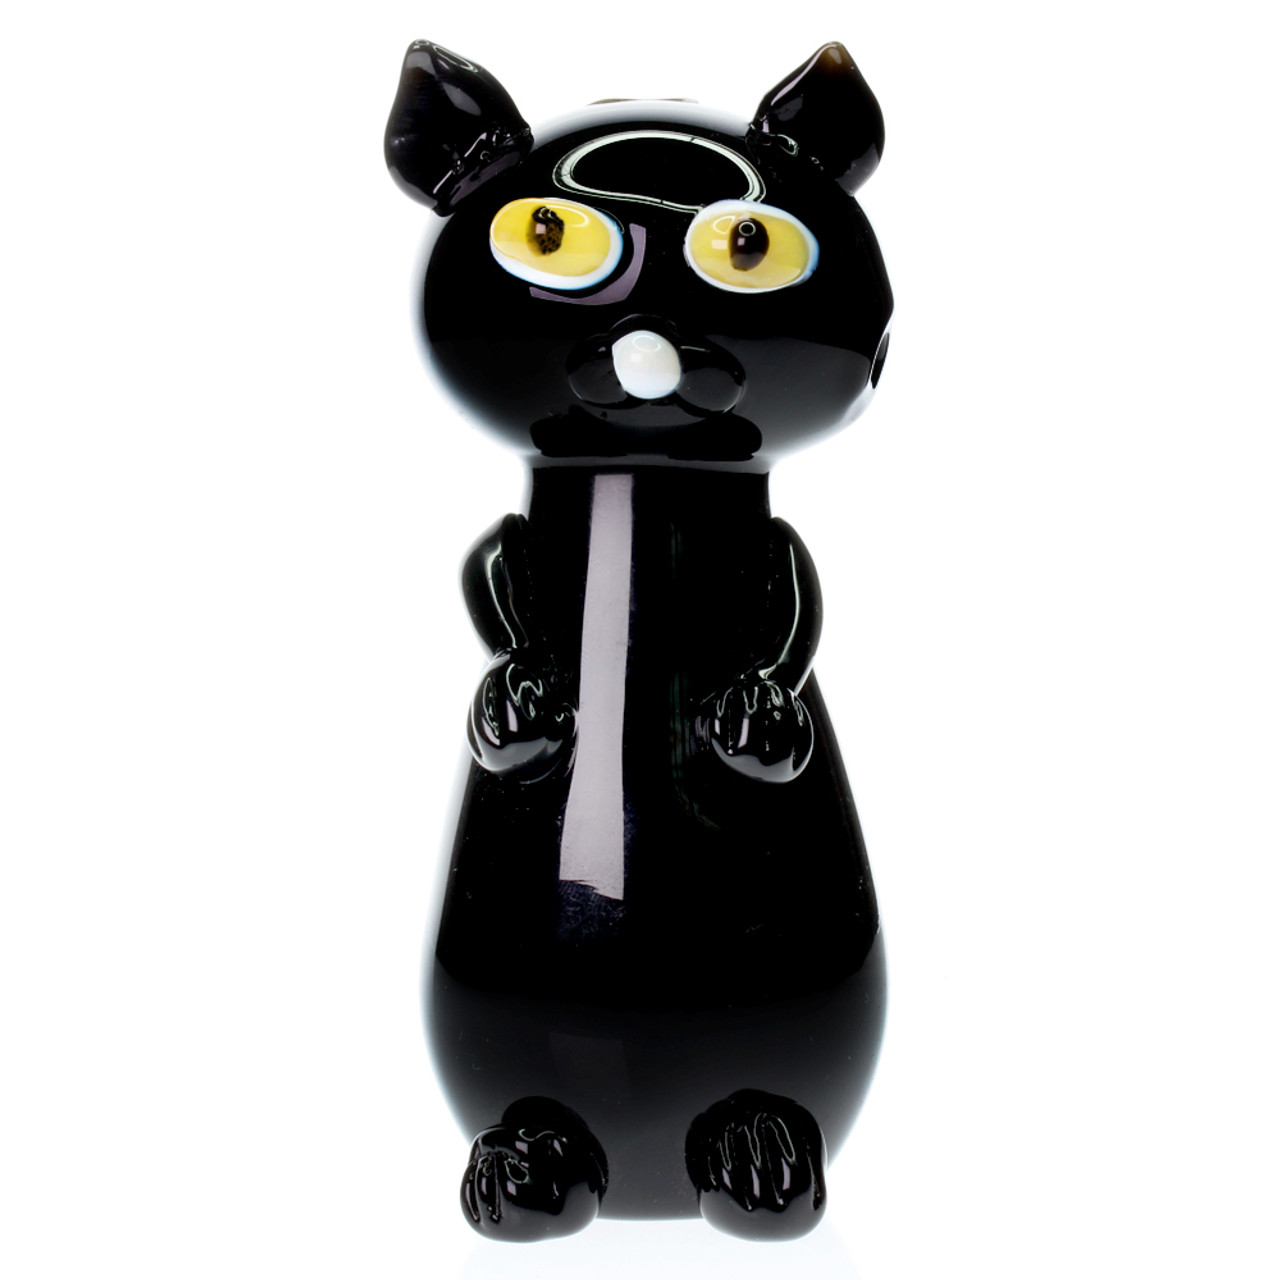 https://cdn11.bigcommerce.com/s-1n8r405nxd/images/stencil/1280x1280/products/8604/17269/spooky-black-cat-glass-hand-pipe-kitty-meow-yellow-eyes-tobacco-smoke-smoking-halloween-theme-buy-82502_6__23275.1601392527.jpg?c=2